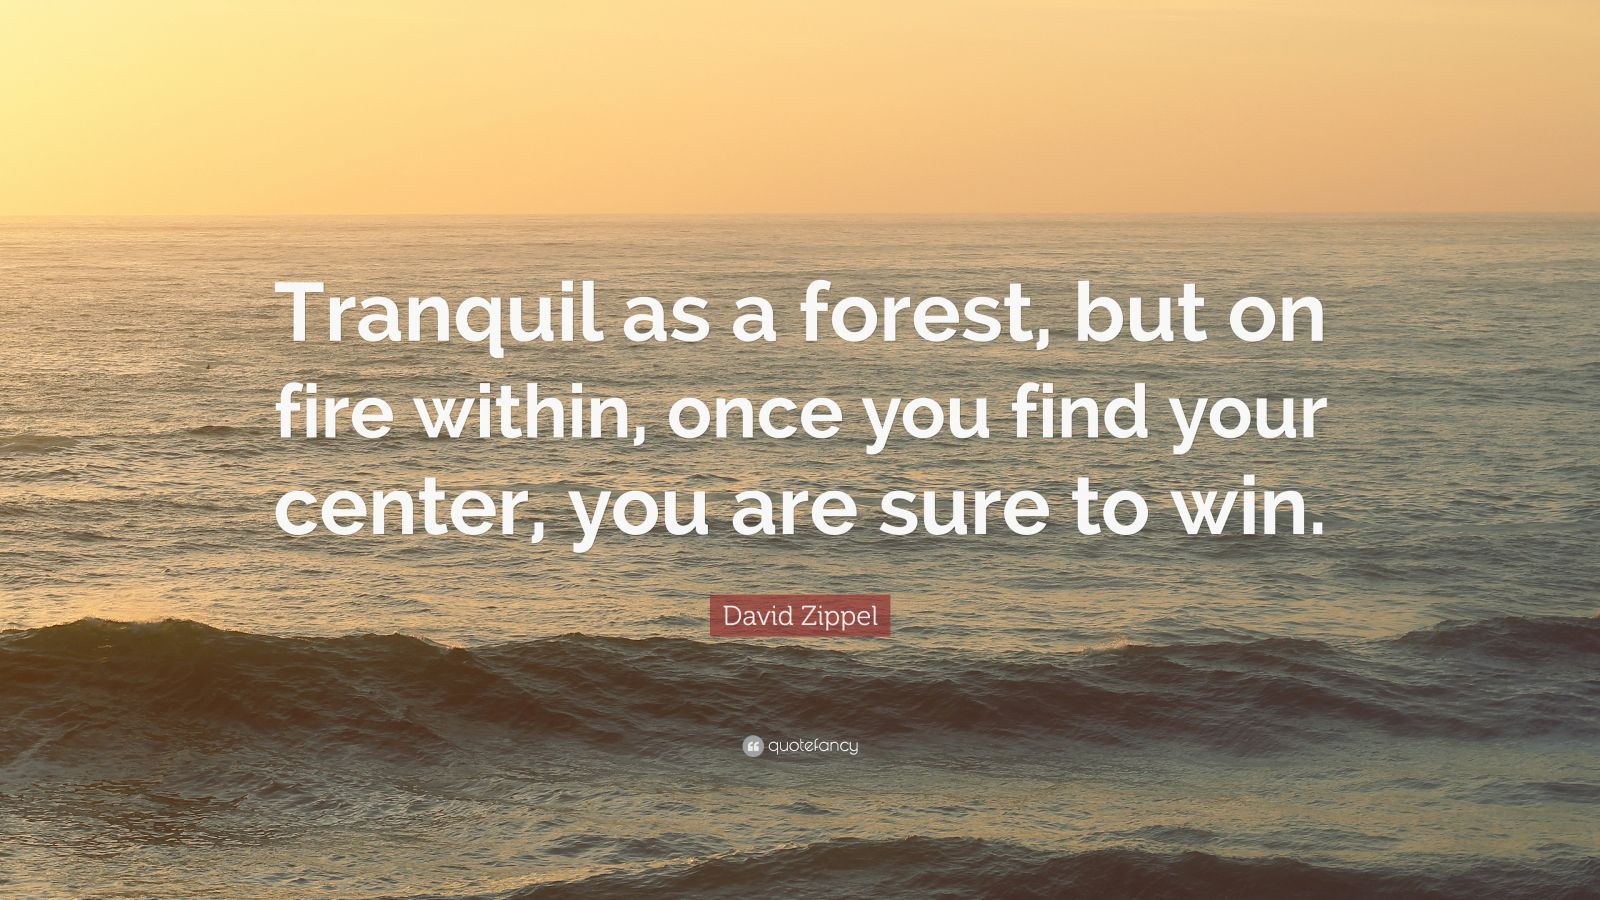 David Zippel Quote “Tranquil as a forest, but on fire